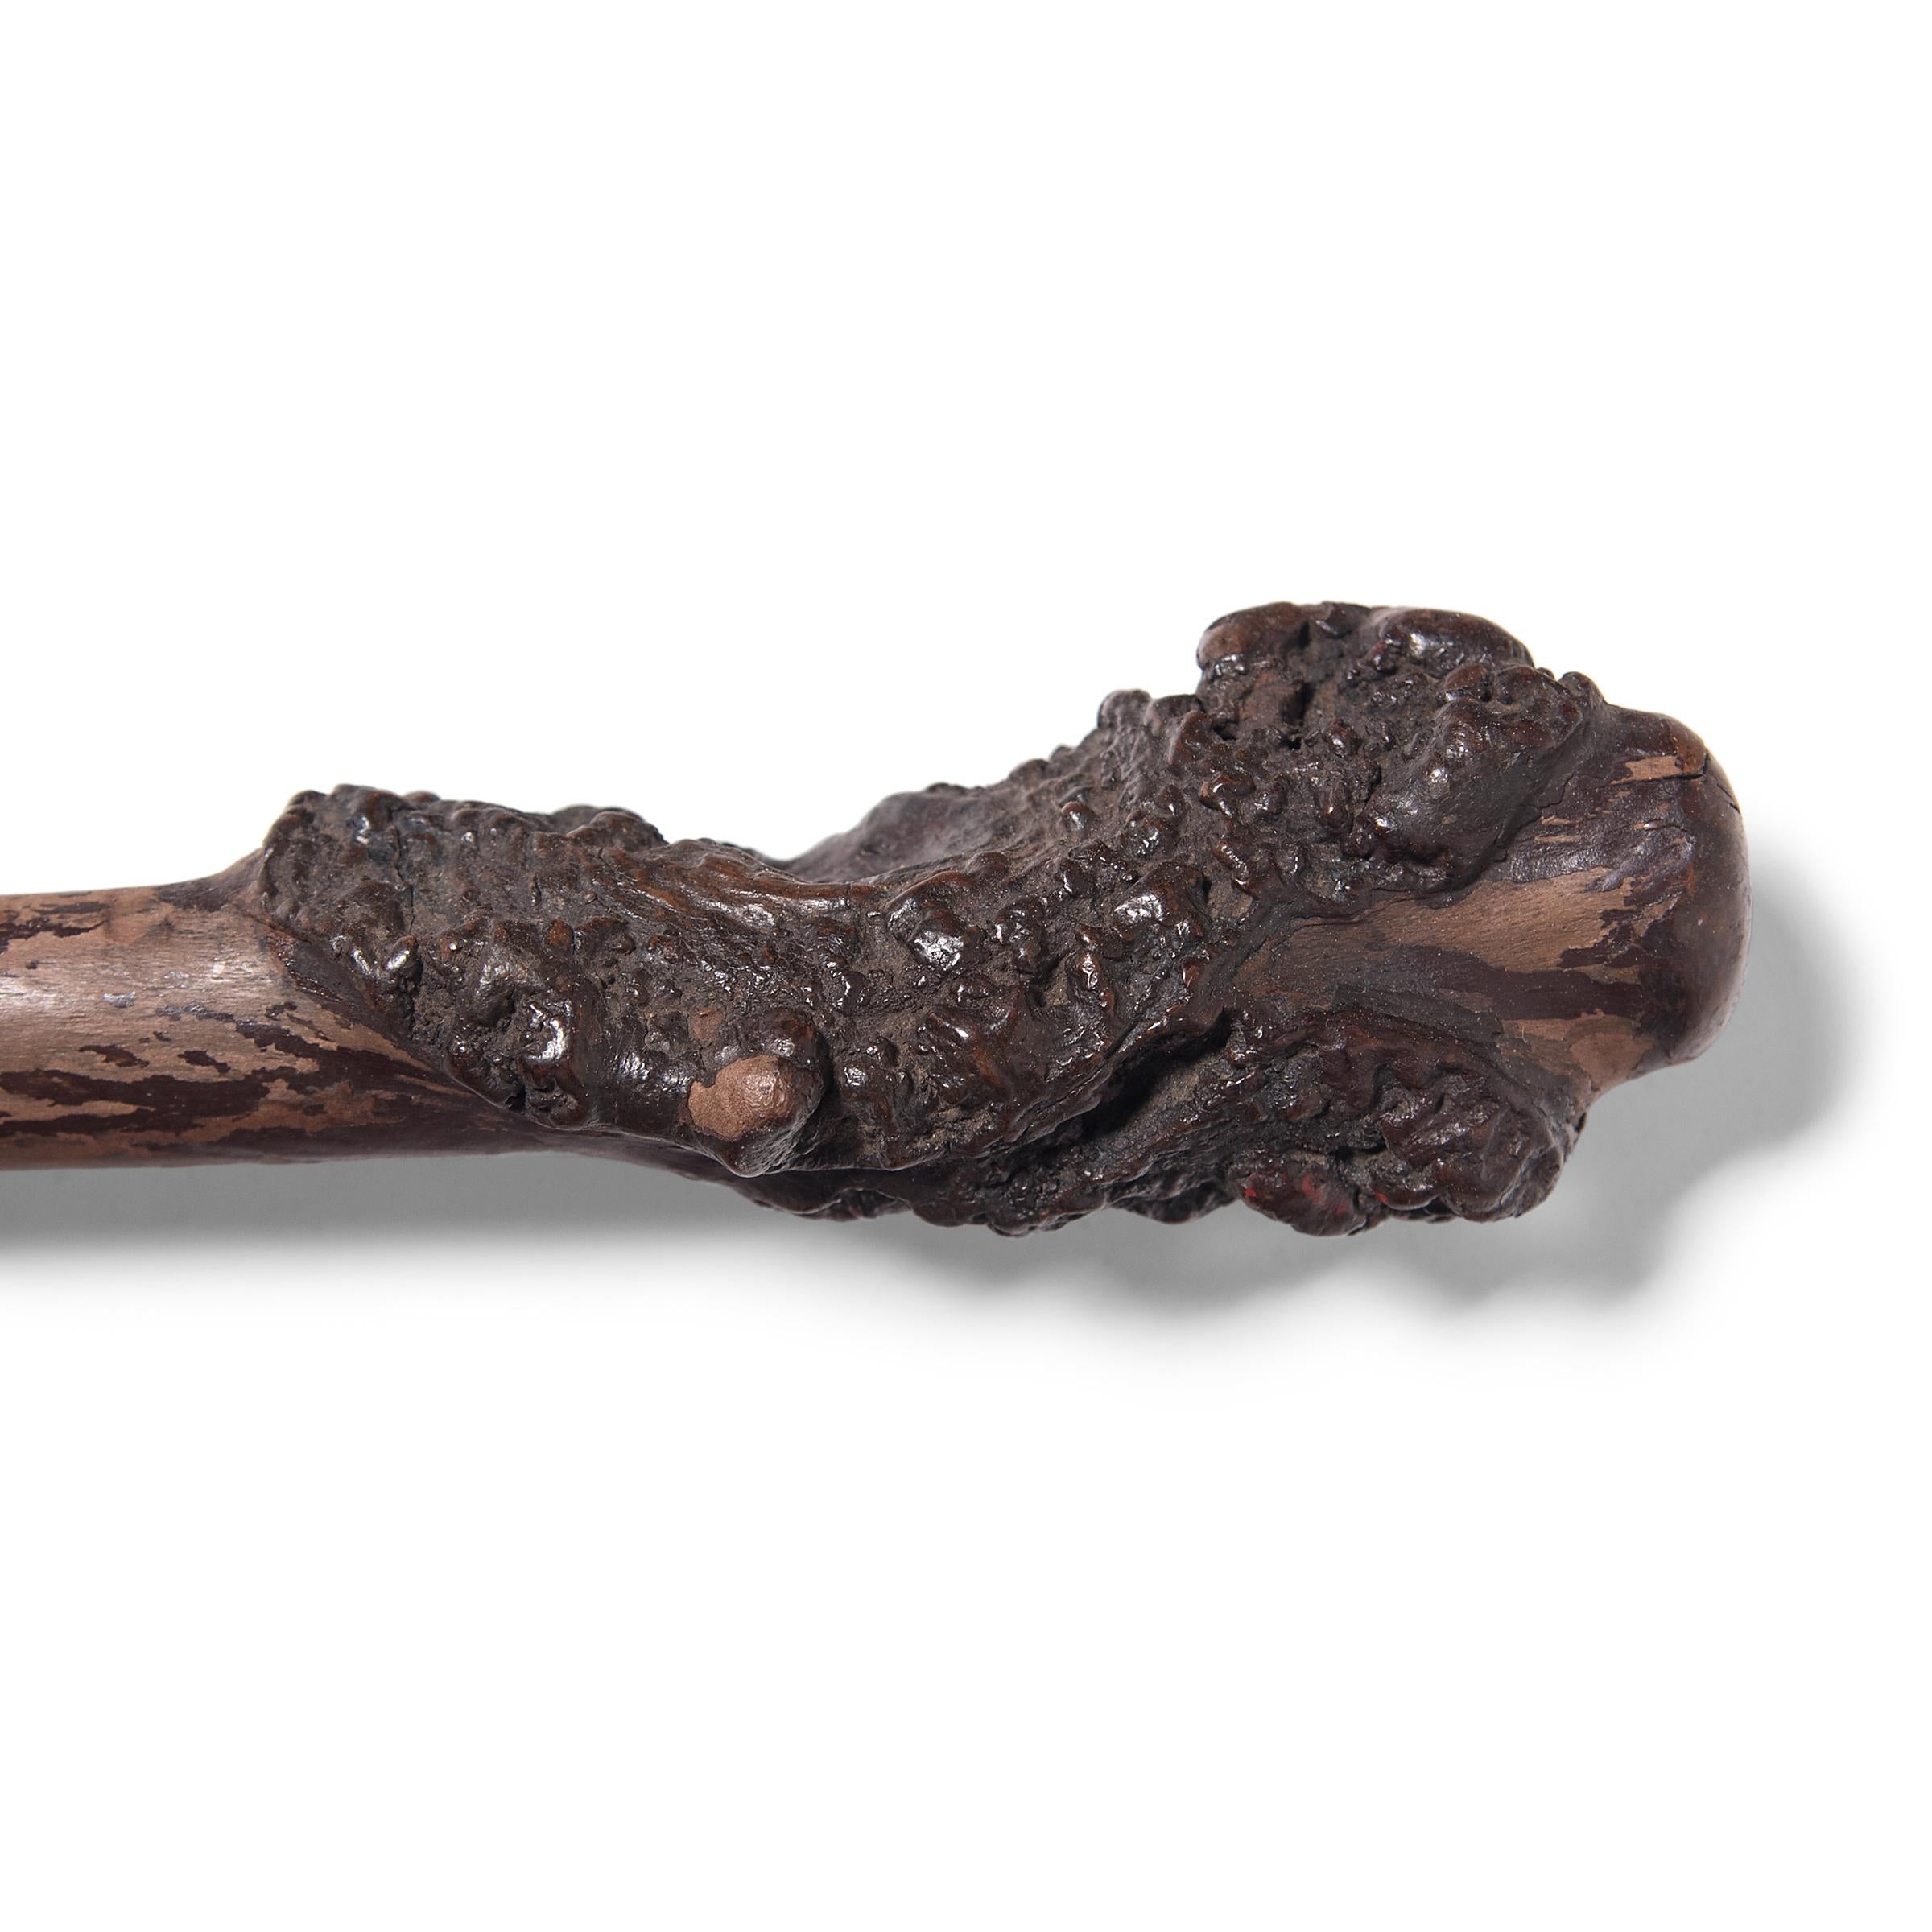 The knotted and twisted nature of root wood has long been celebrated in China, as evidenced in this fantastic late 19th-century walking stick. The wood’s unusual gnarled form was carefully preserved as it was carved into a functional walking stick -